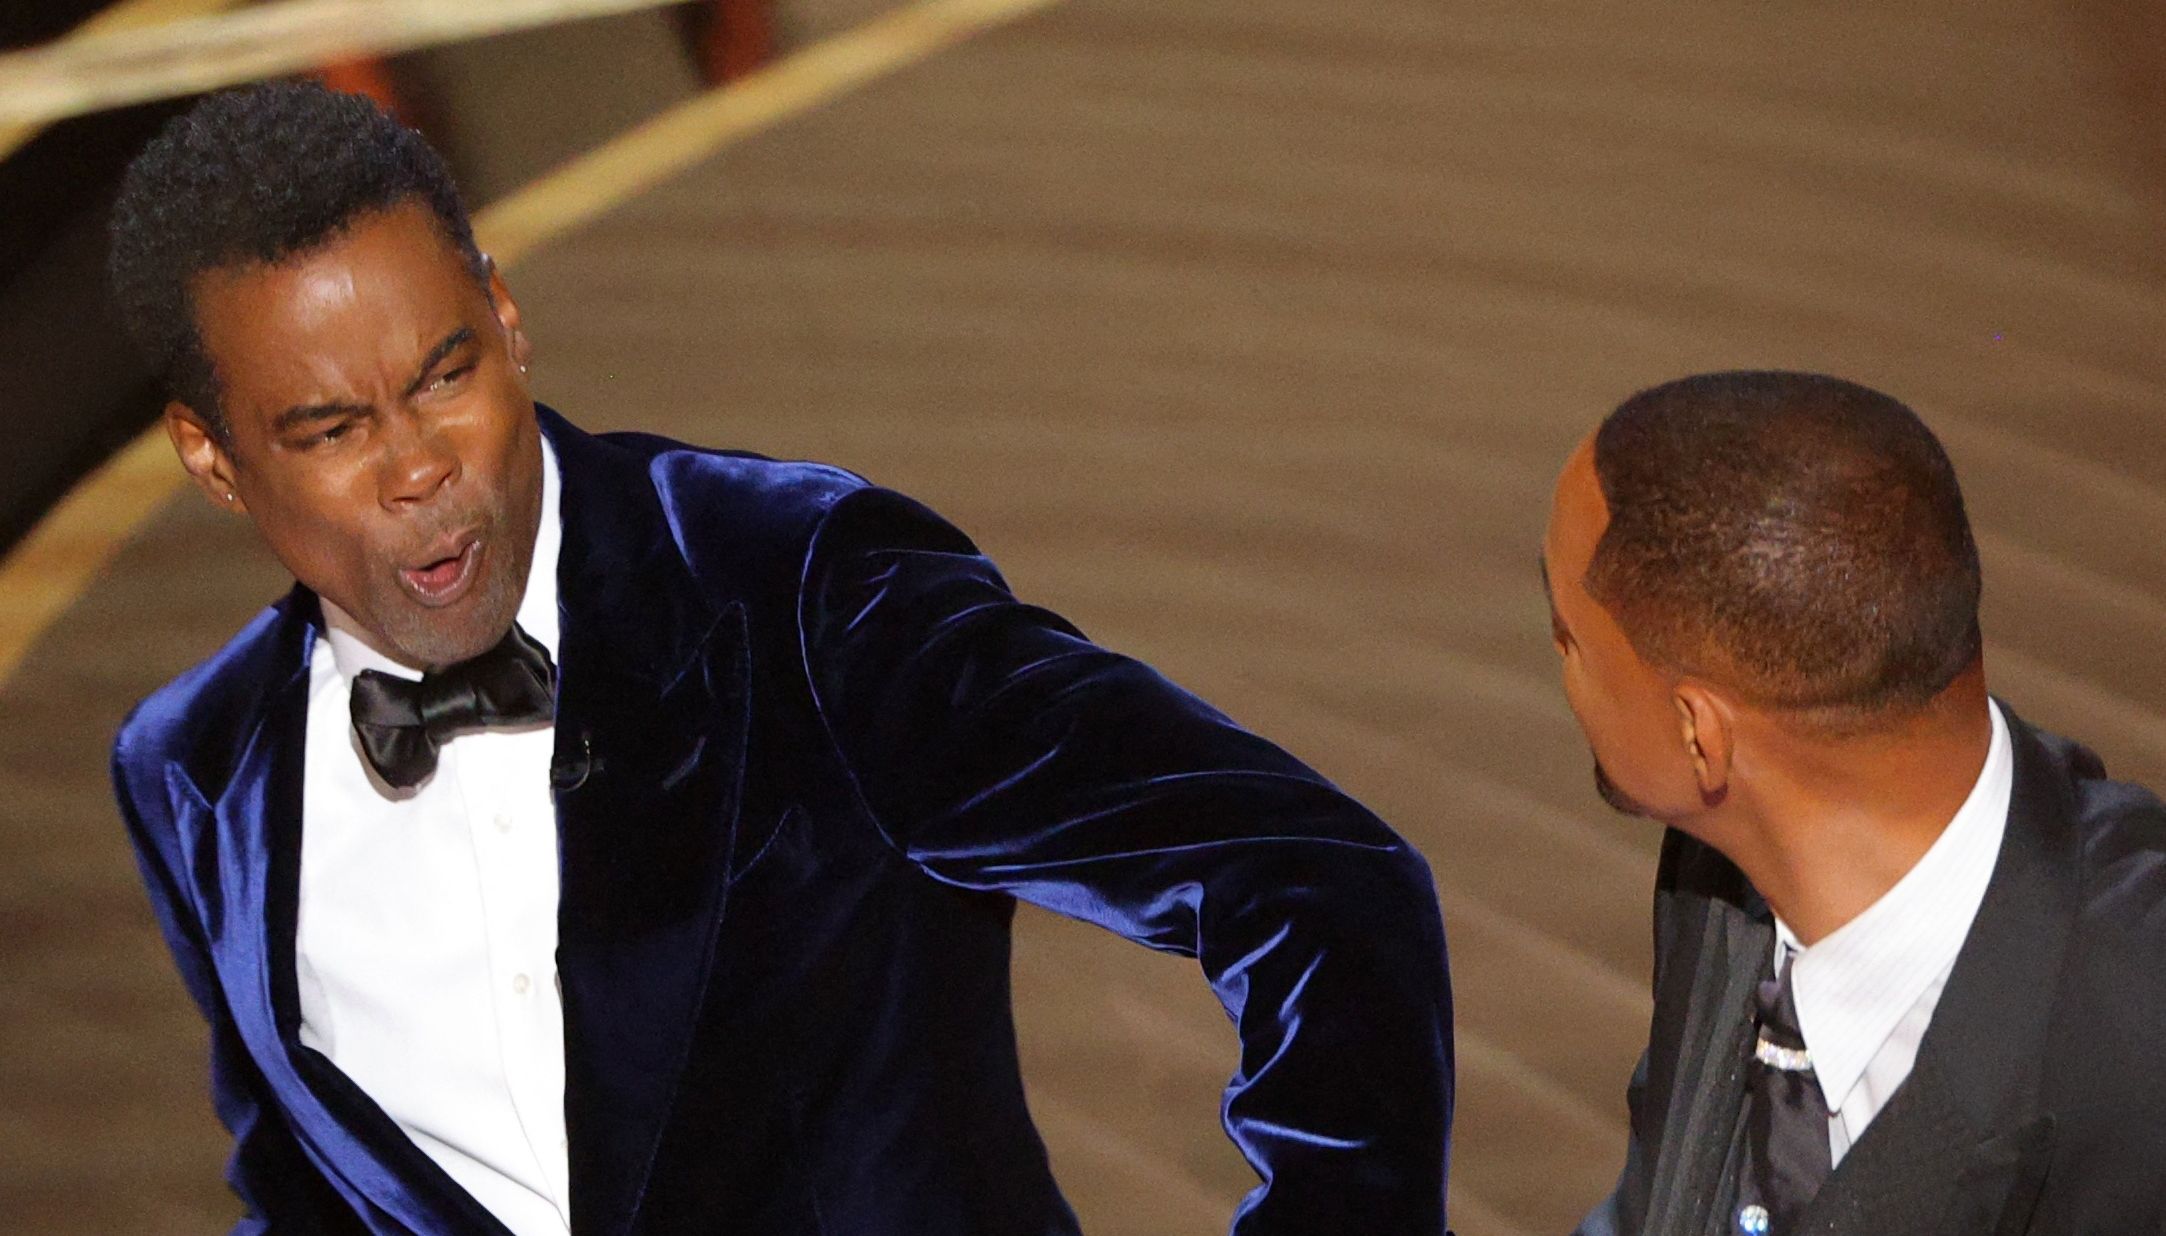 Will Smith hits Chris Rock as Rock spoke on stage during the 94th Academy Awards in Hollywood, Los Angeles, California